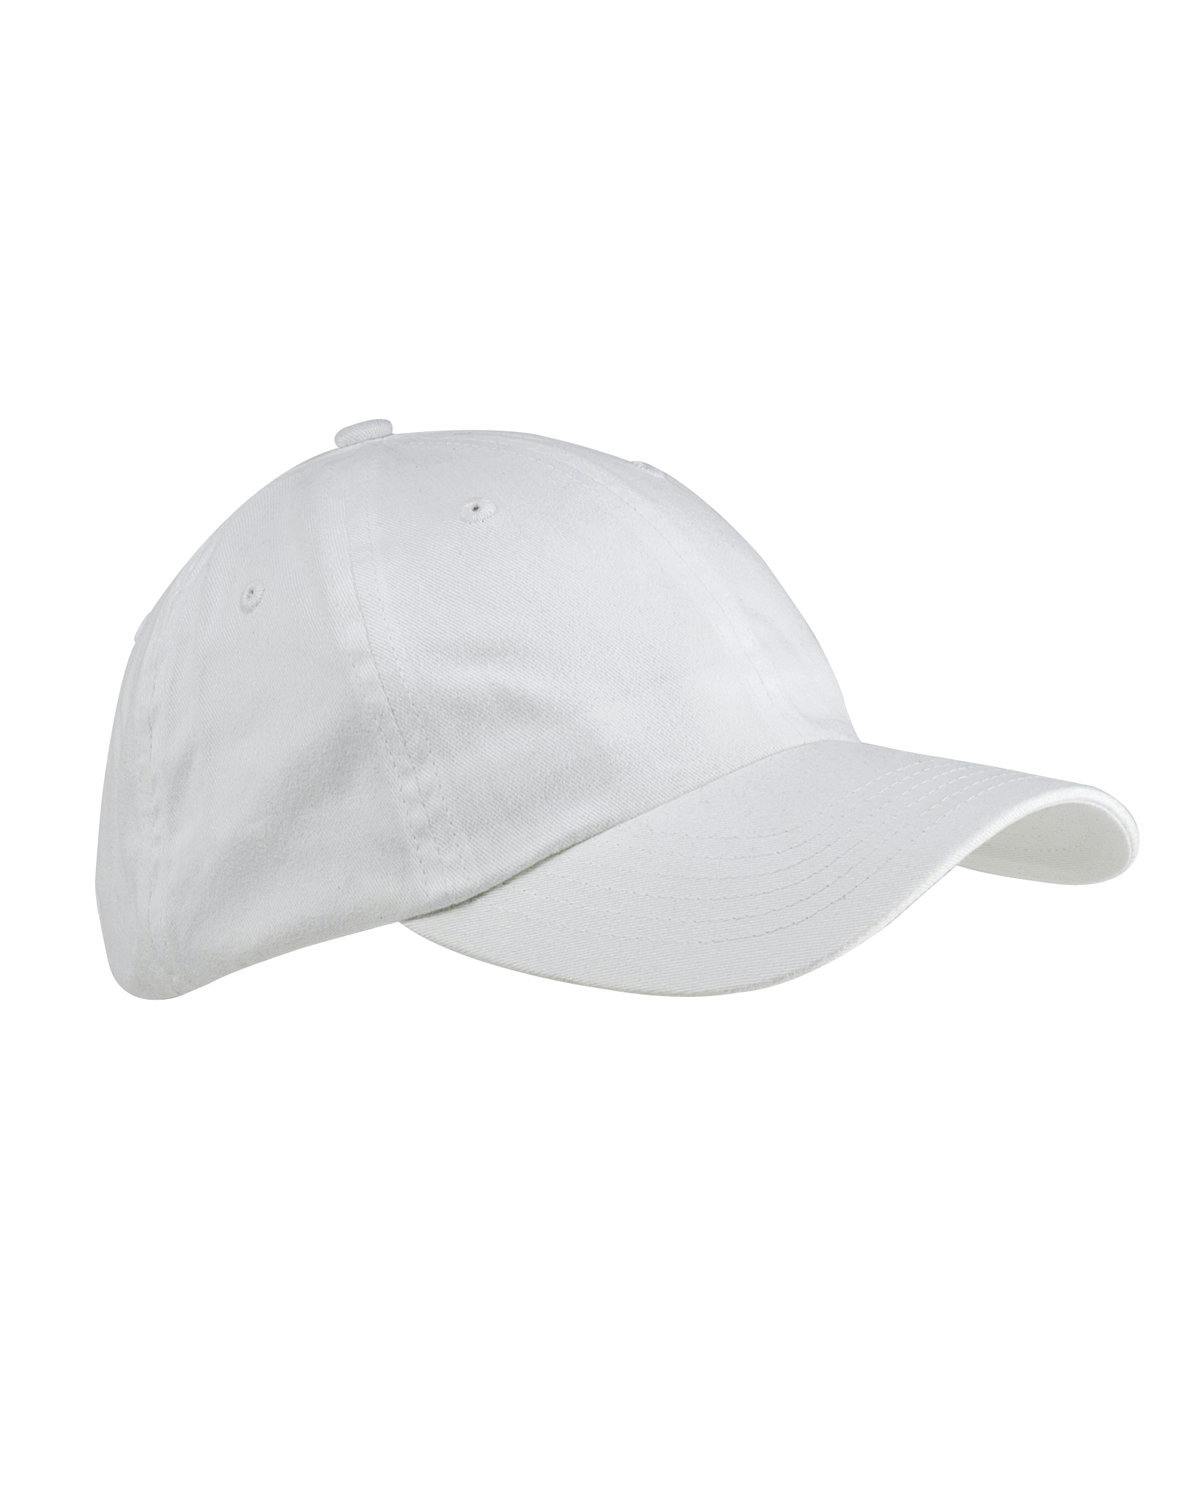 Image for Brushed Twill Unstructured Cap